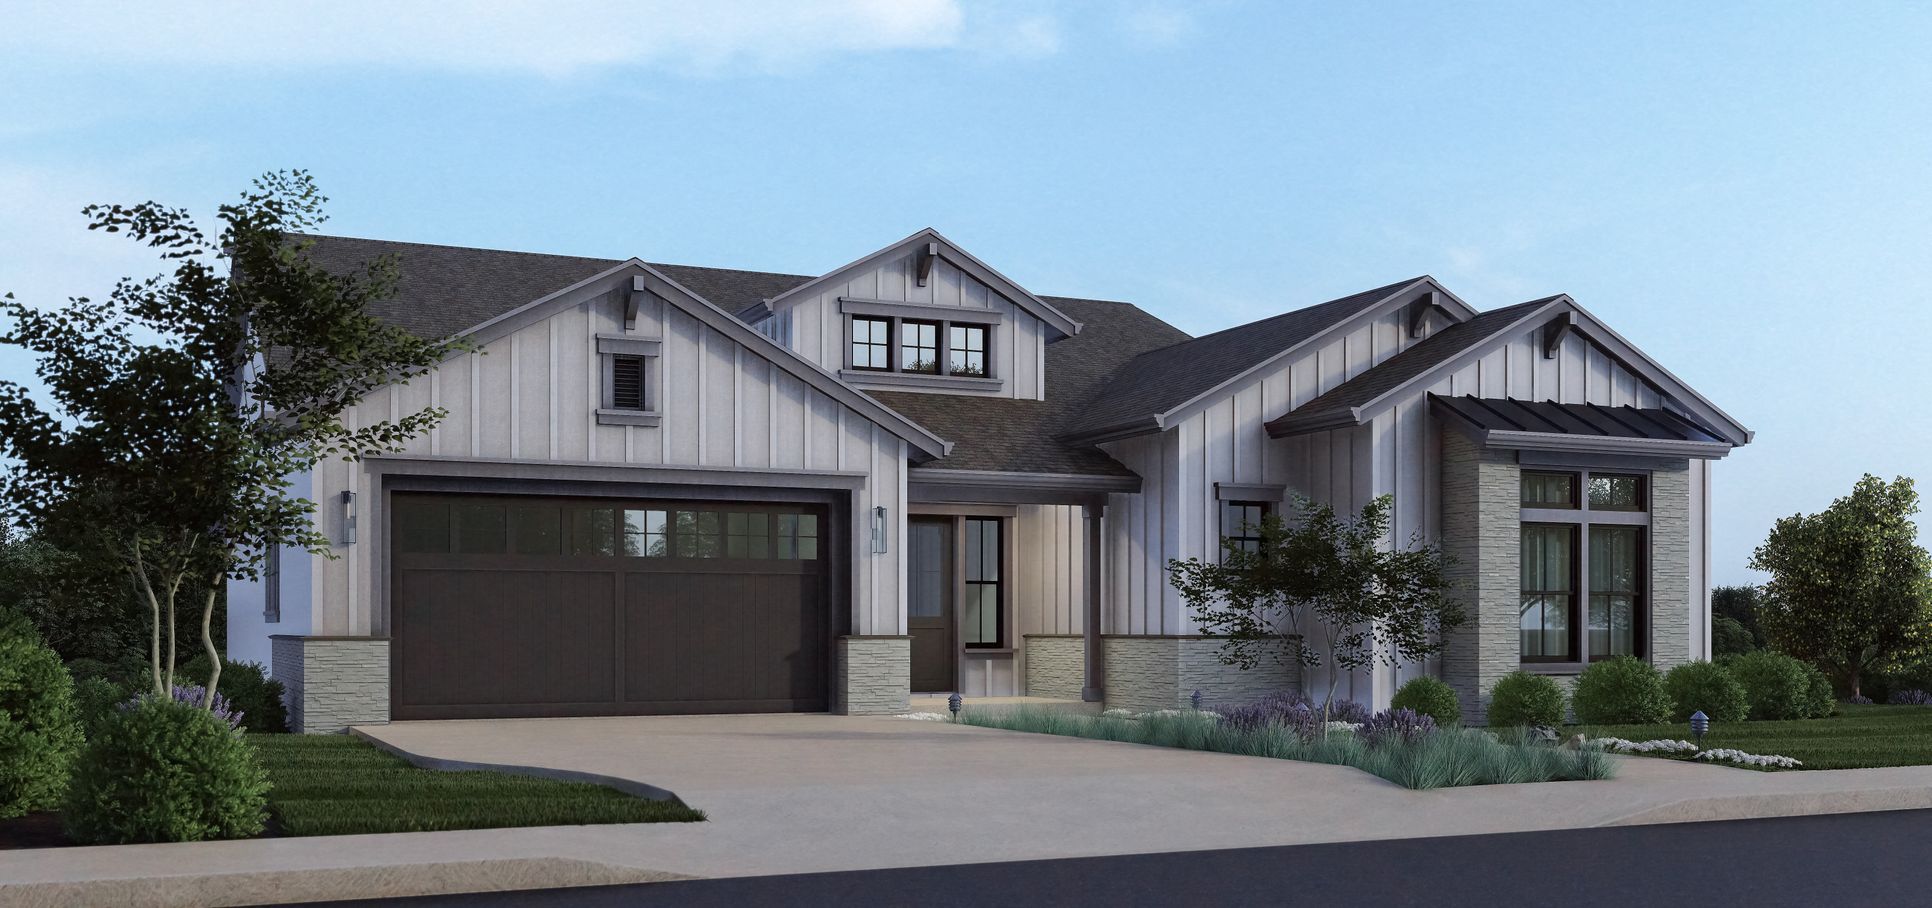 3712 Crown Hill by Christopherson Builders:Artist's Conceptual Rendering - New Single Level Home in Fountaingrove - Coming in 2024